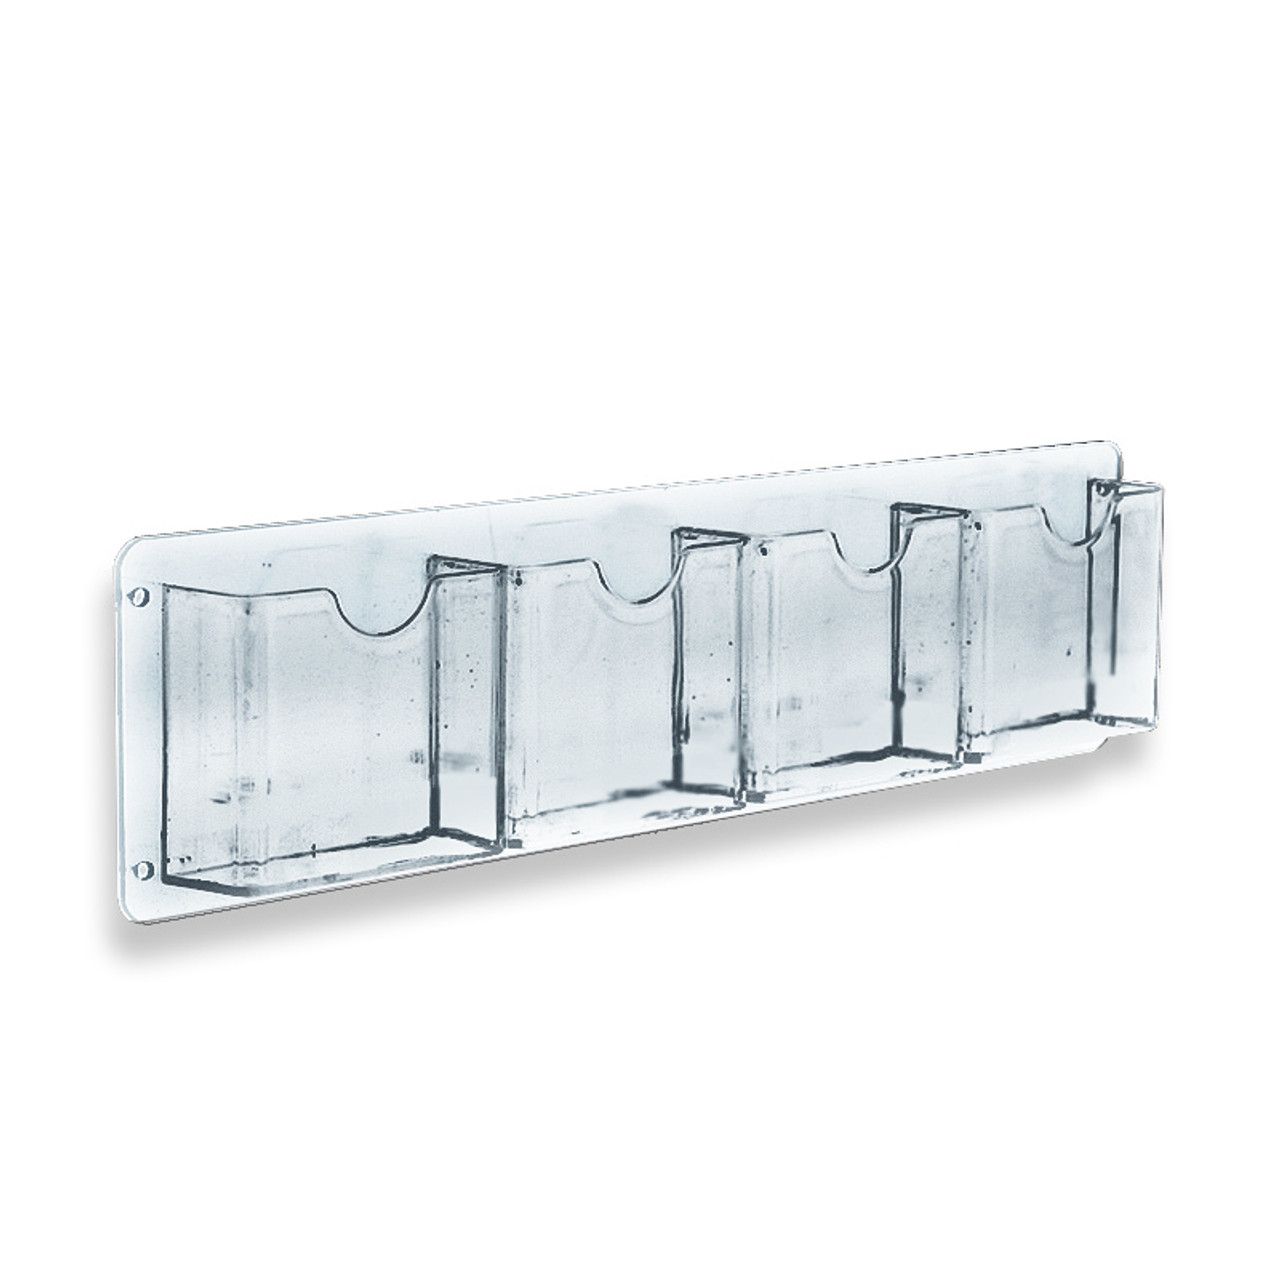 Four Pocket Tri-Fold Wall Rack. Clear Acrylic Wall Mount Brochure Holder  for Tri-Fold Size Pamphlets, Horizontal Alignment. Overall Size: 19.5"W x  5.5"H, 2-Pack Azar Displays